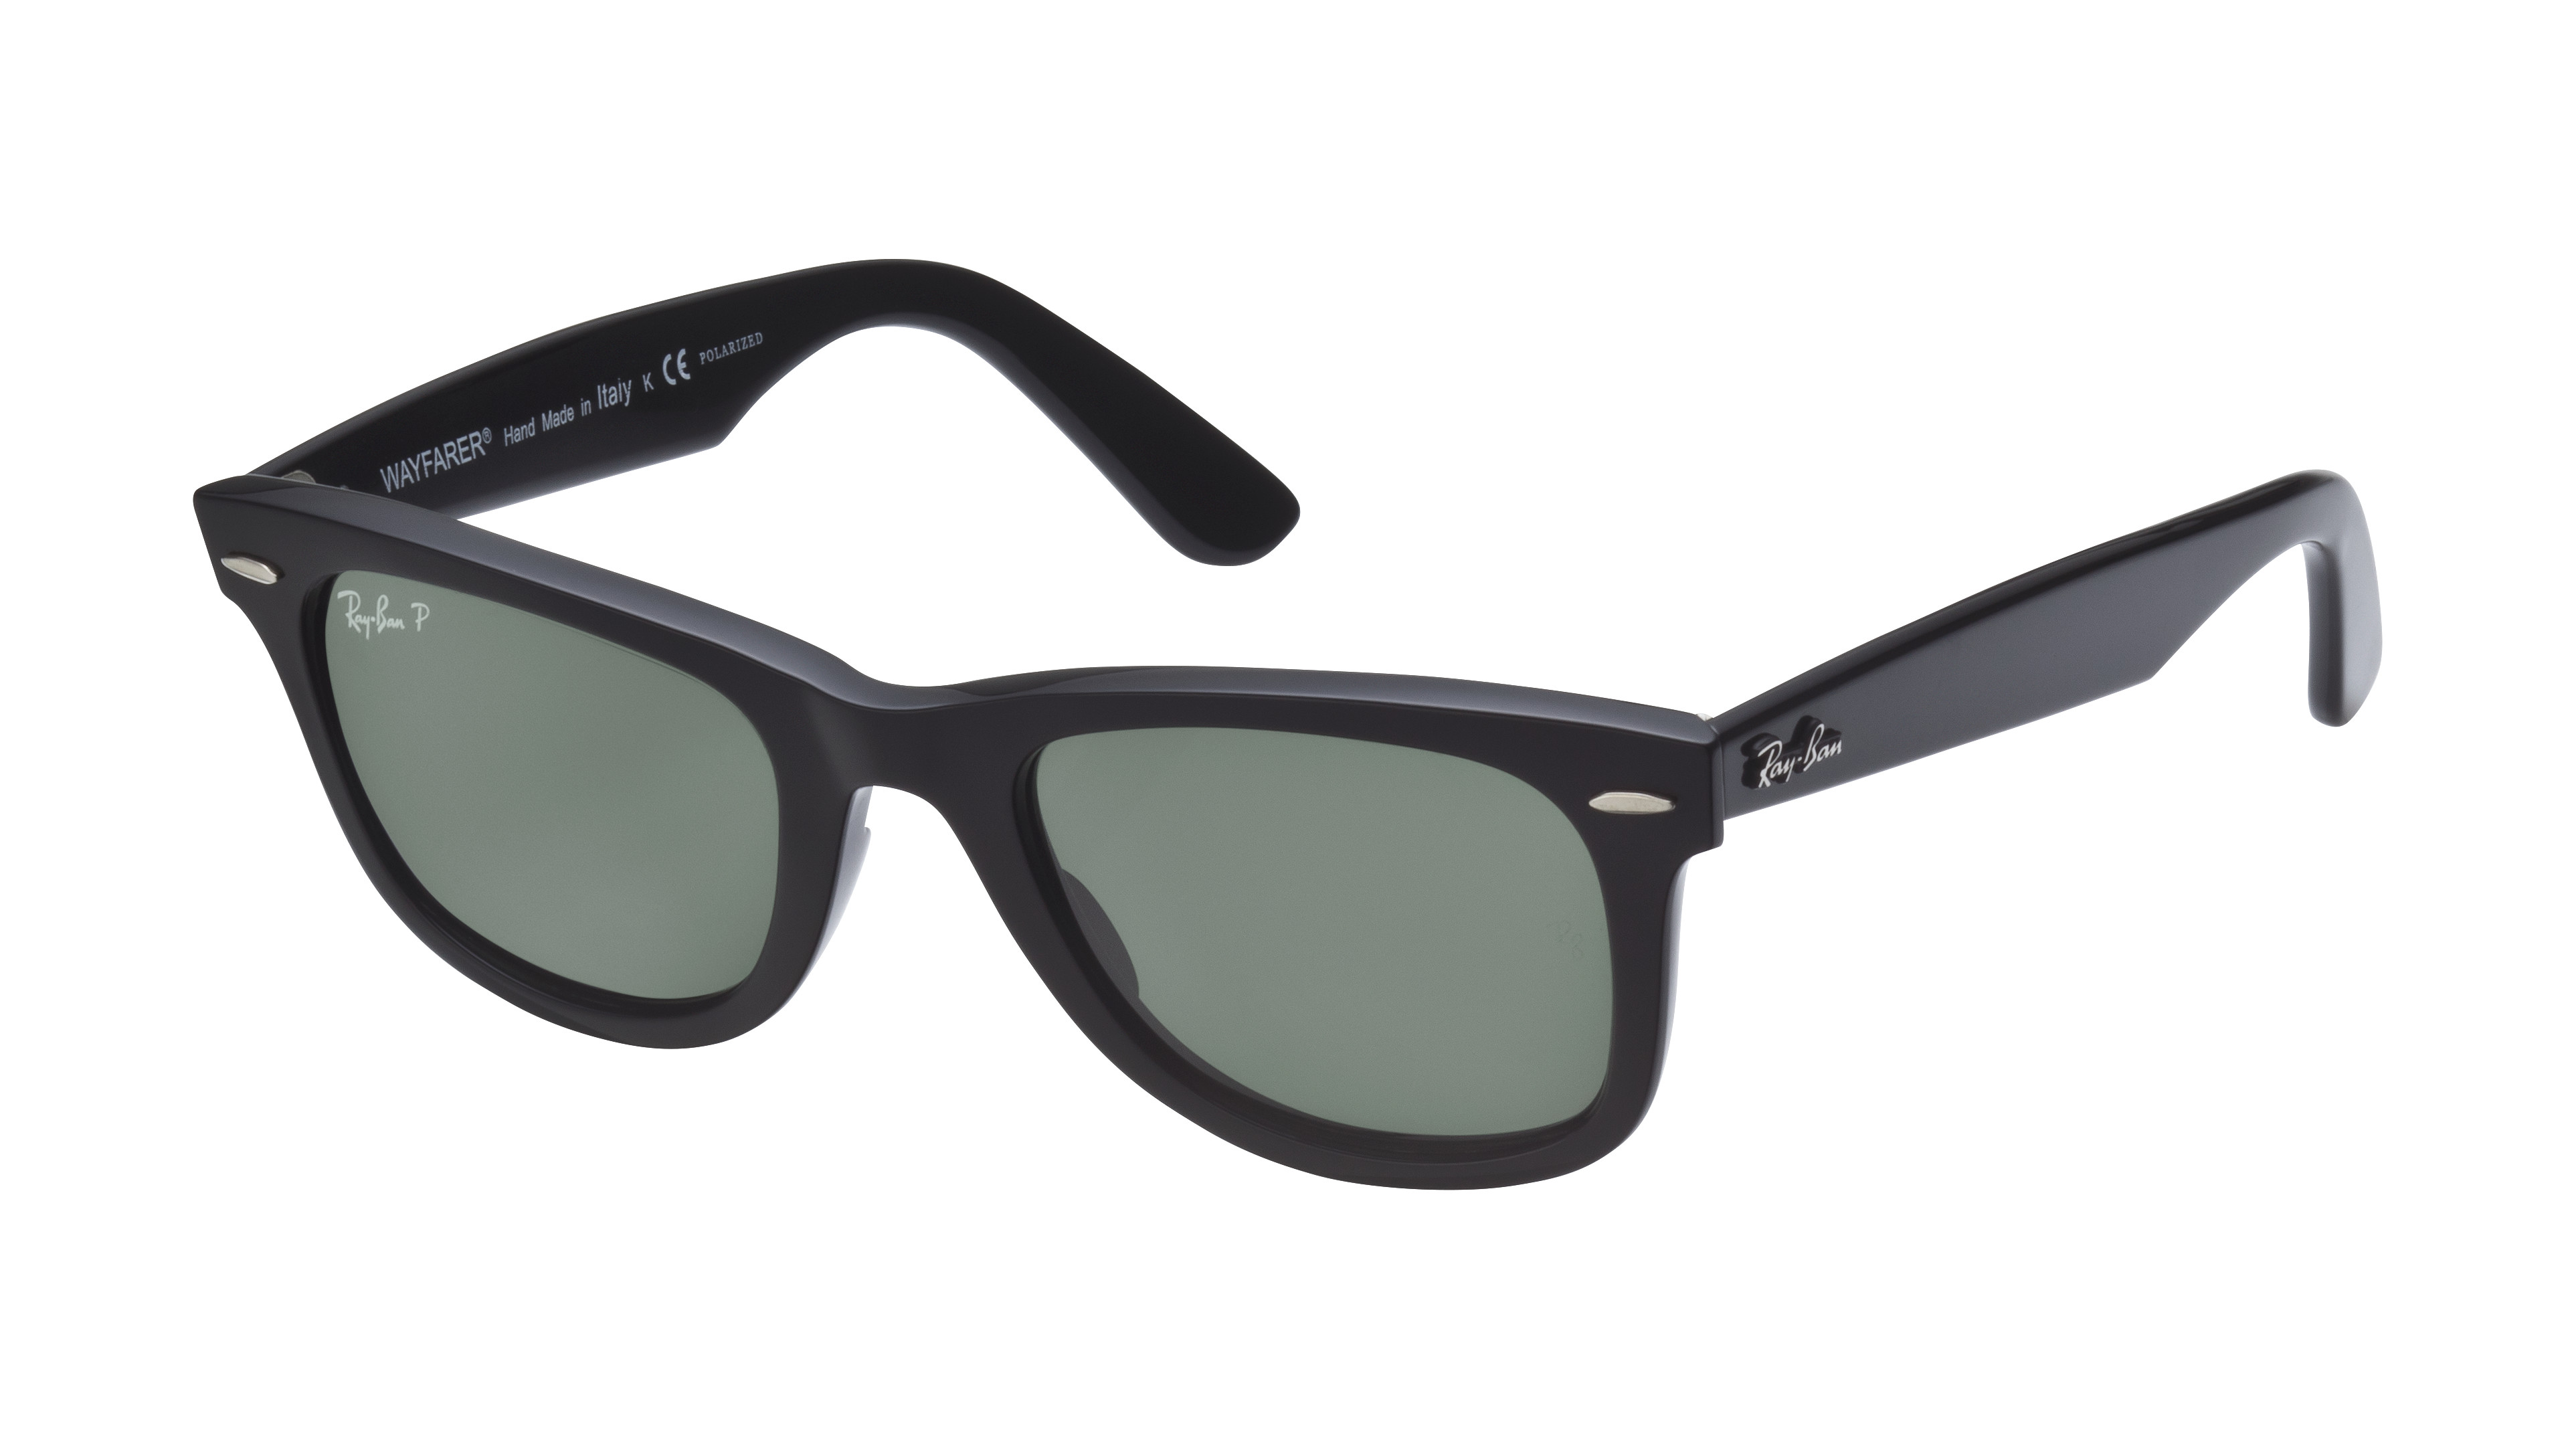 [products.image.angle_left01] Ray-Ban Wayfarer 0RB2140 901/58 Sonnenbrille